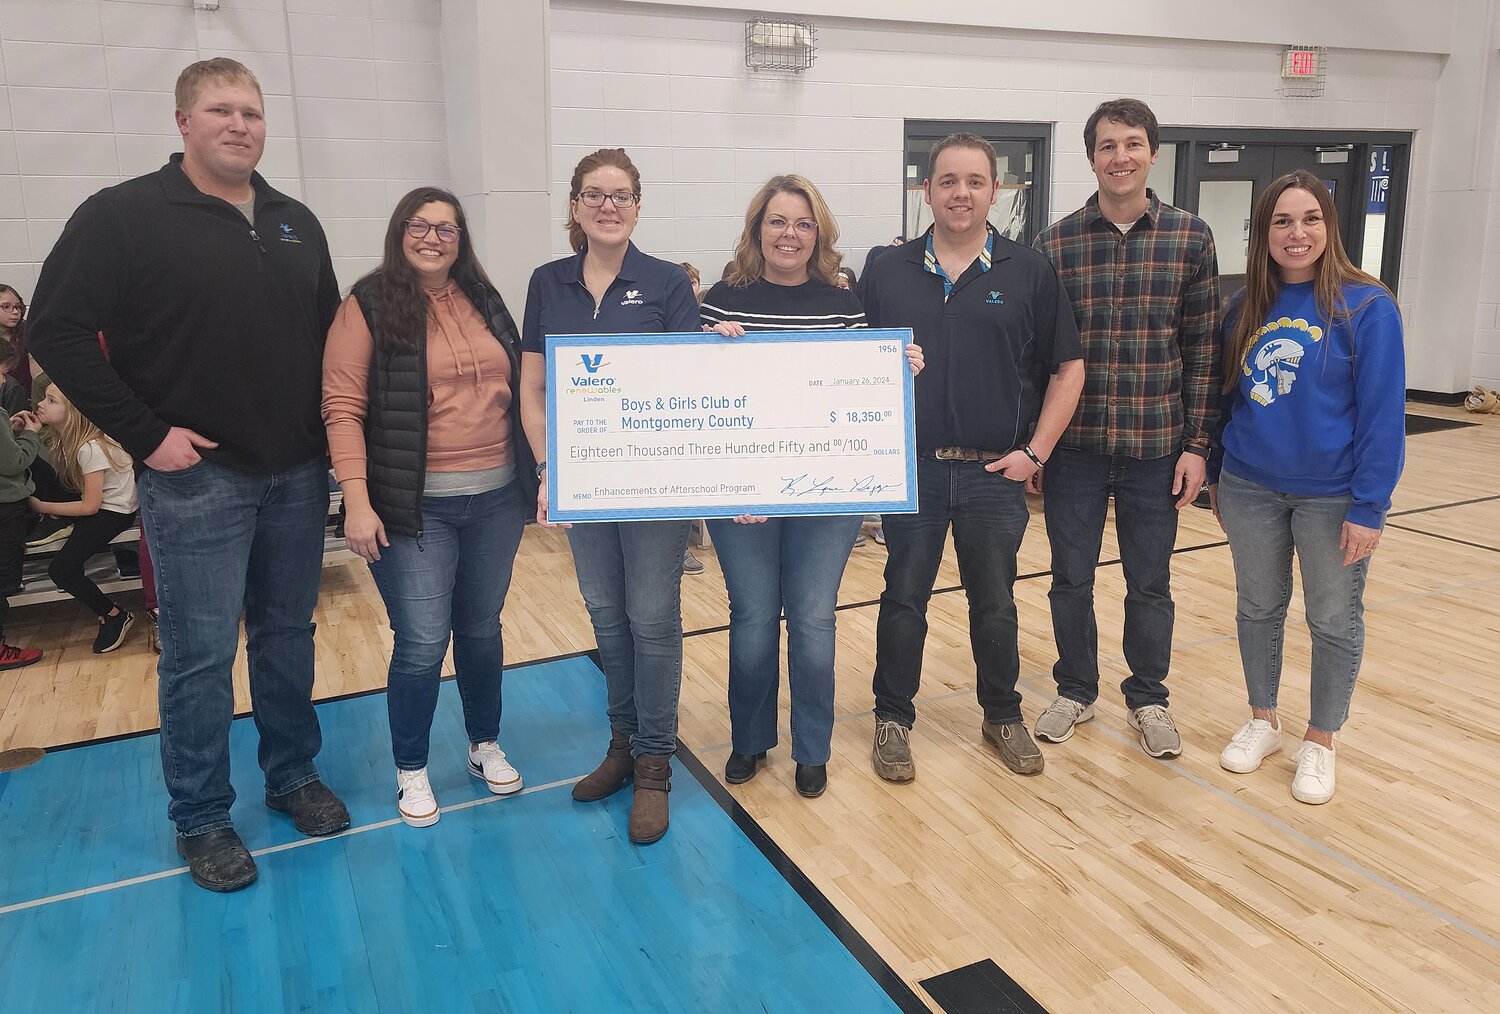 Pictured from left, are, Brent Schlote, Valero Linden; Jaime Selby, Boys & Girls Club; Mary Broadstreet, Valero Linden; Erica Cummins, Boys & Girls Club; Jake Peterson and Jon Bowman, both of Valero Linden; and Shelby Rusk, Boys & Girls Club.